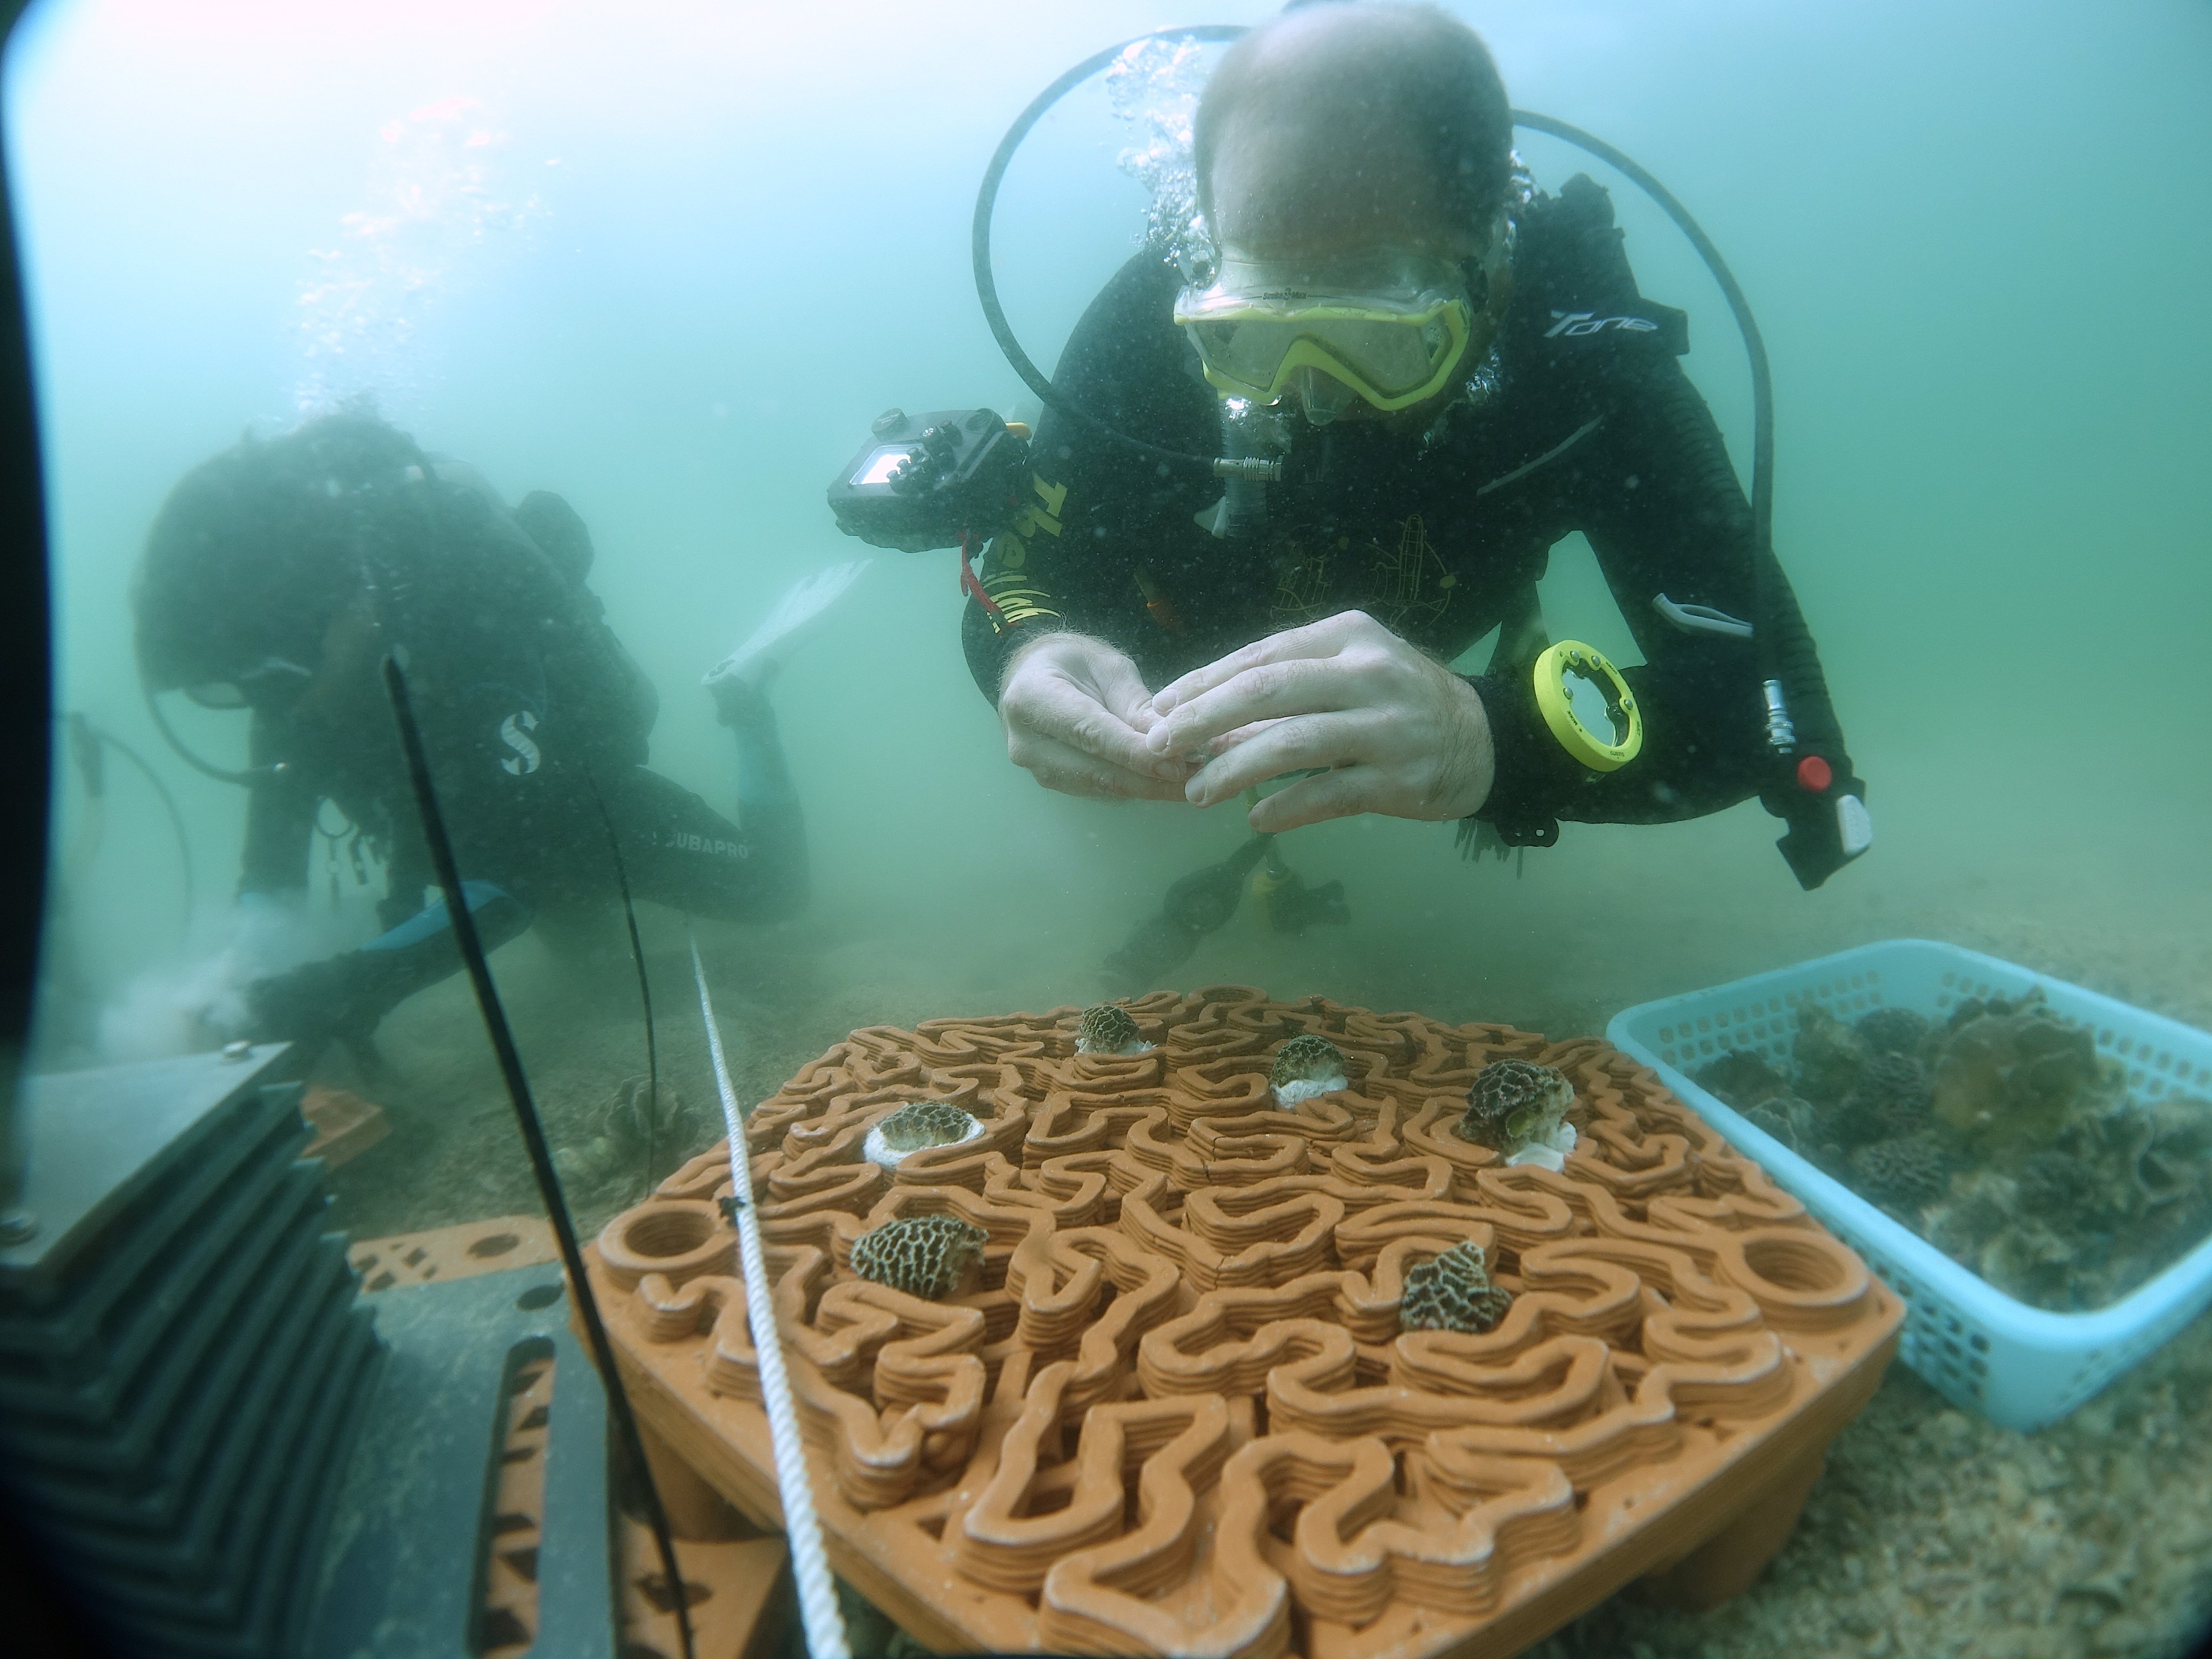 Coral fragments are planted onto archiREEF’s terracotta tiles in Hong Kong’s Hoi Ha Wan Marine Park in this file photo from August 2020. Photo: Handout